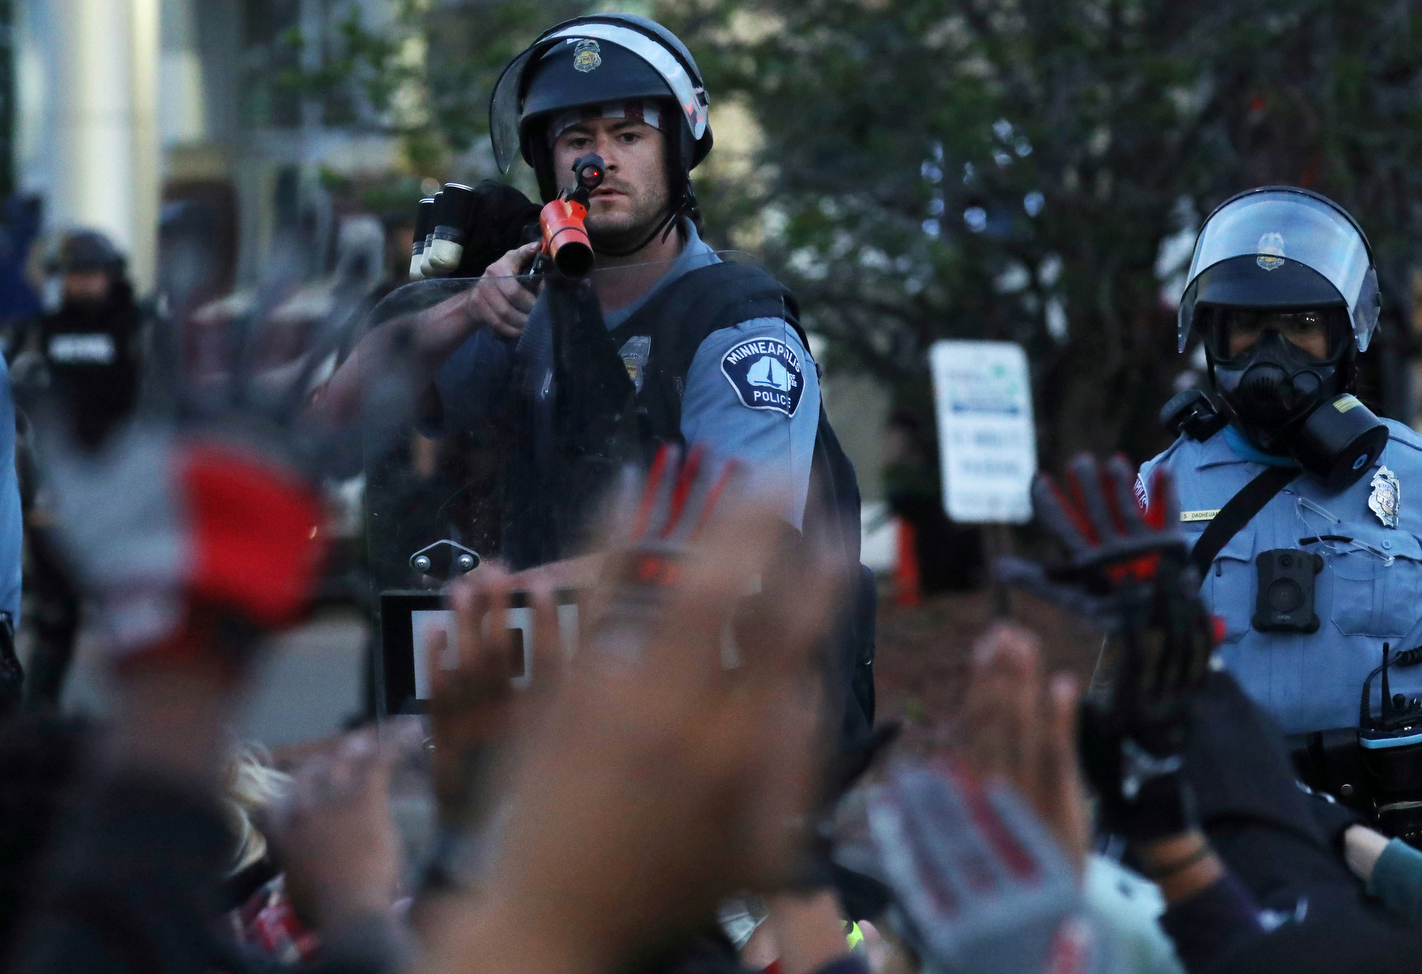 A member of Minneapolis police aims a {quote}less lethal{quote} weapon at seated protesters from a few feet away as they hold their hands up after a group of them were rounded up for a mass arrest following another day of protest calling for justice for George Floyd in Minneapolis May 31, 2020. 